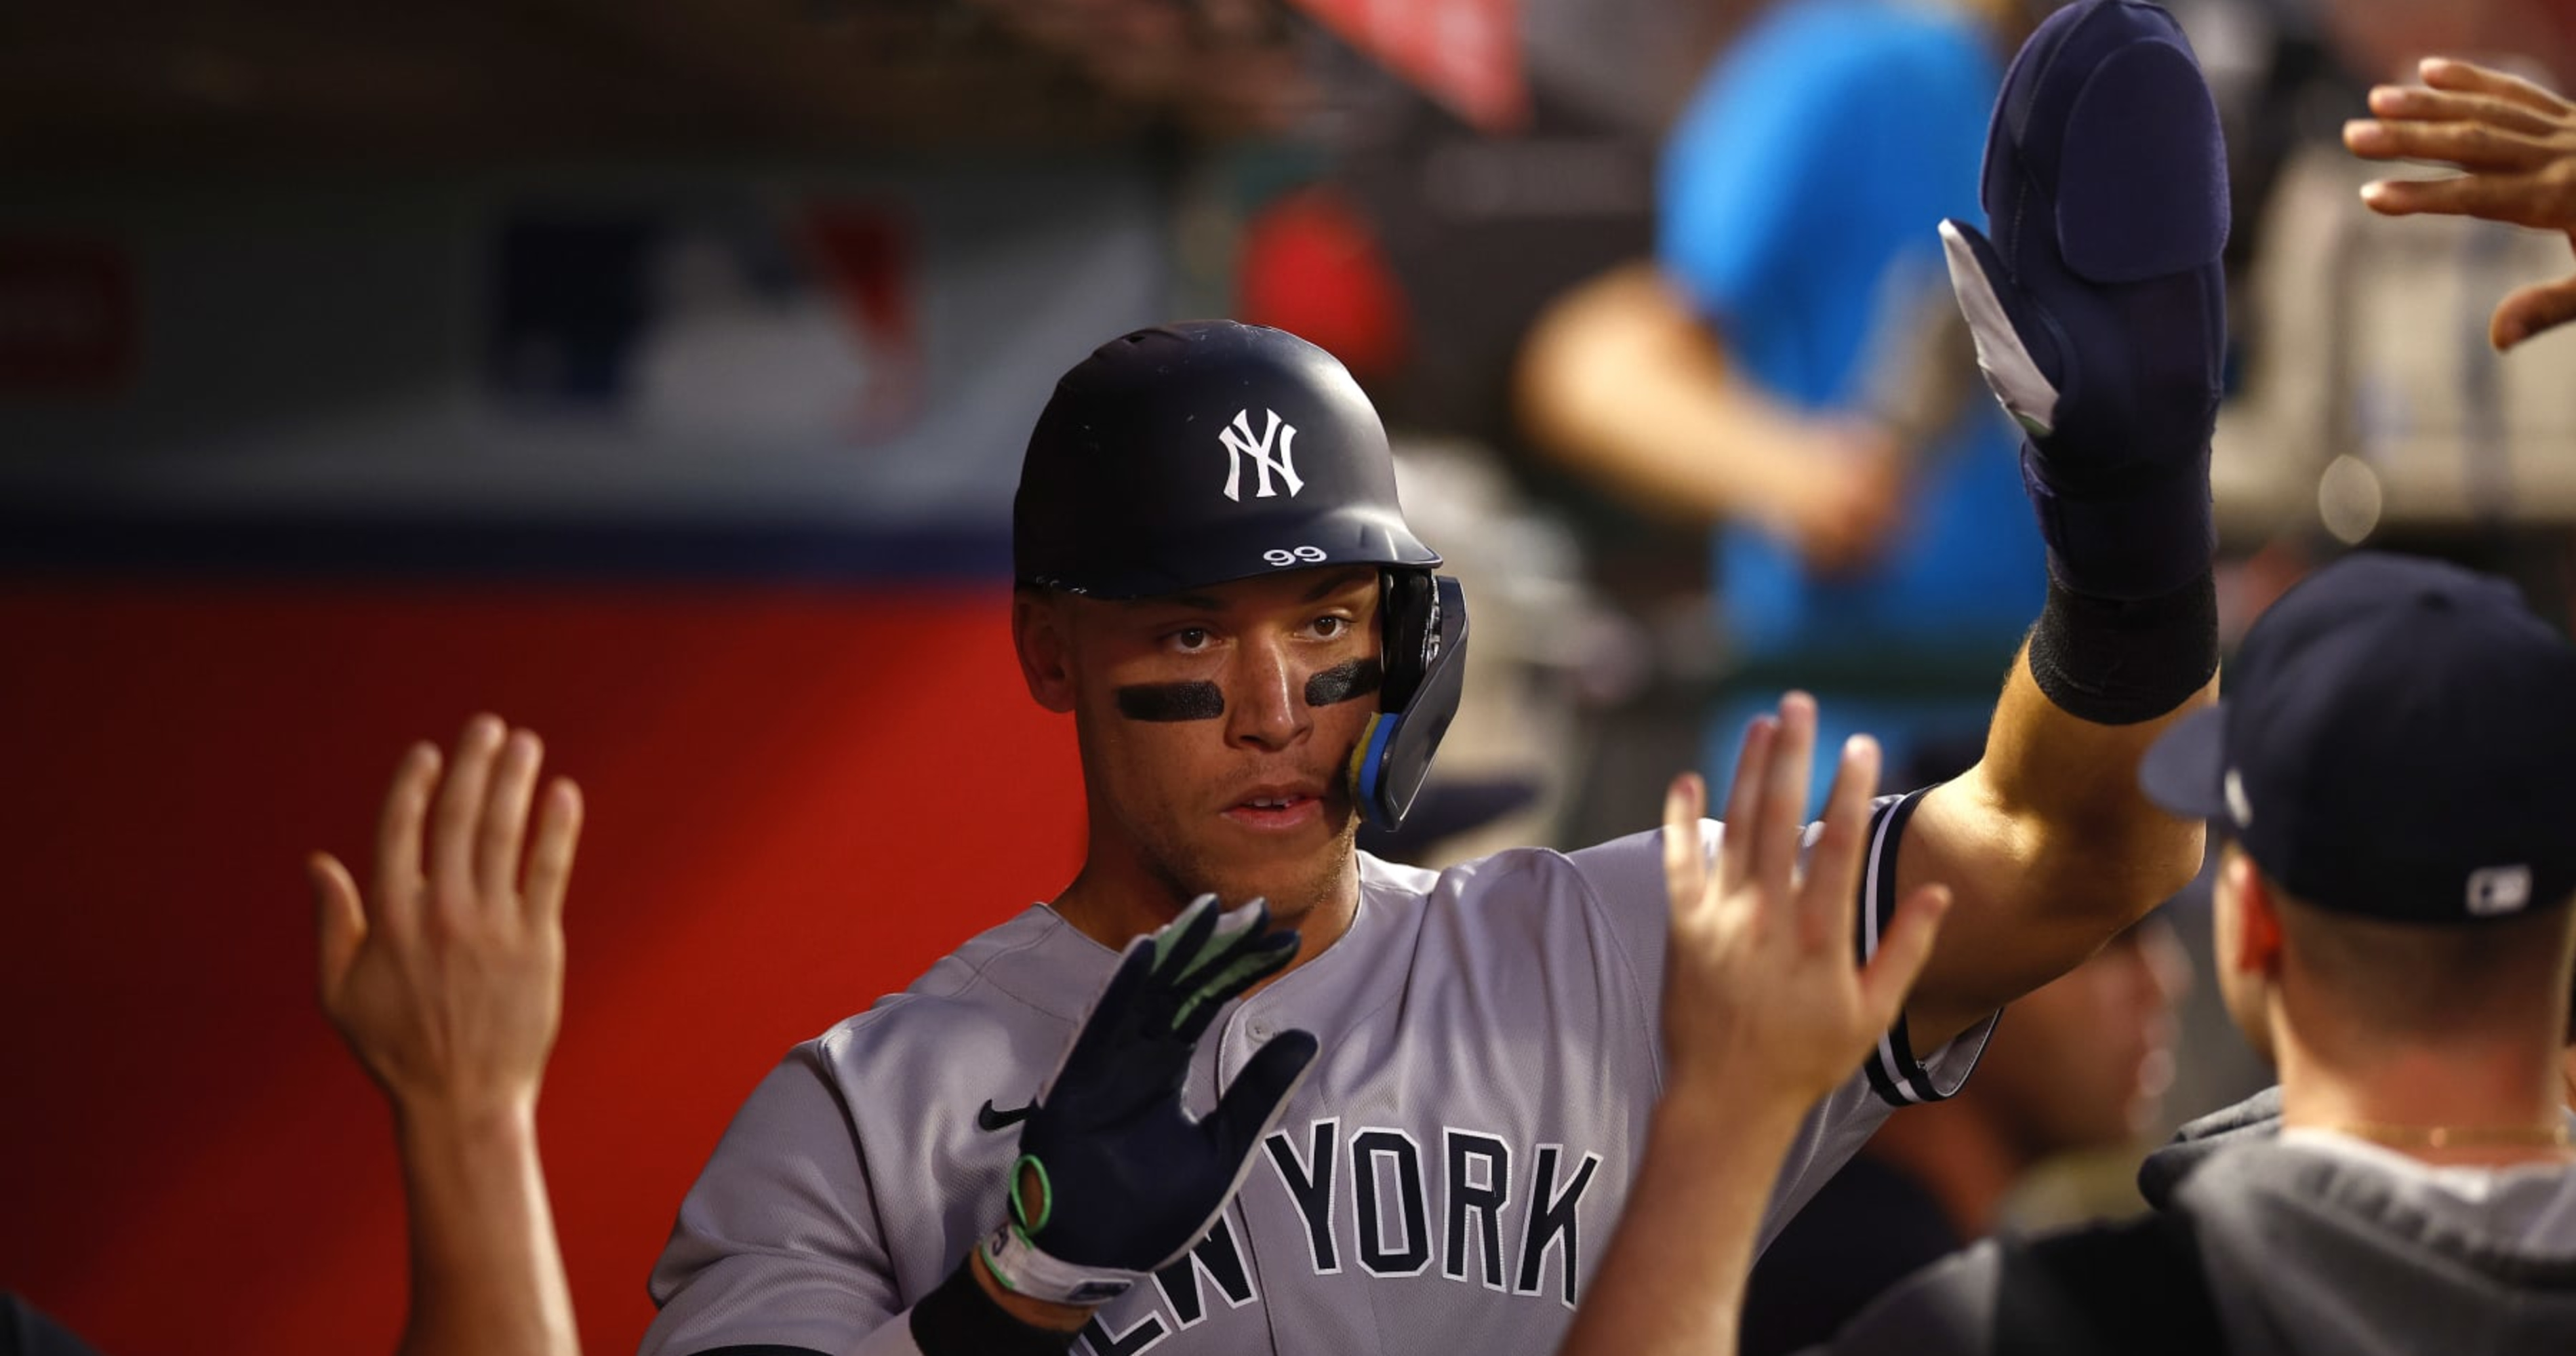 Aaron Judge to Sign With Yankees, per Report - Sports Illustrated